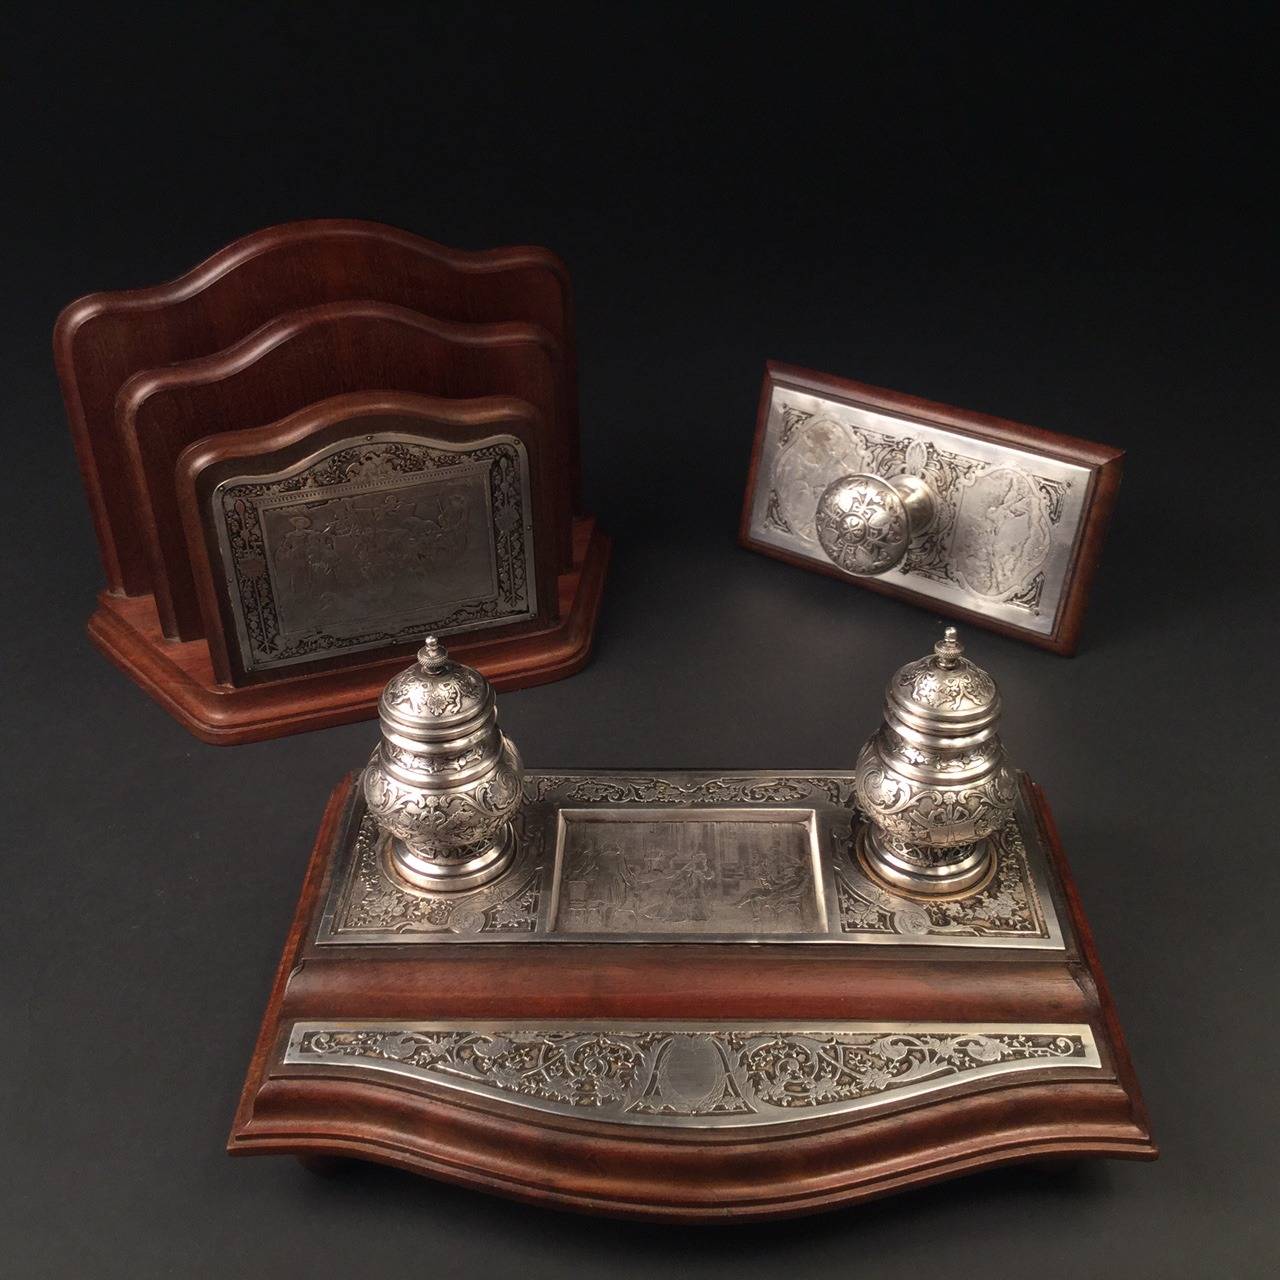 Late 19th century French desk set with an inkwell, a letter holder and a blotter.
Mahogany with silver plated copper engraved plaques.
very good condition.
Some wears on the plaque of the letter holder.
No glass containers in the inkwell.